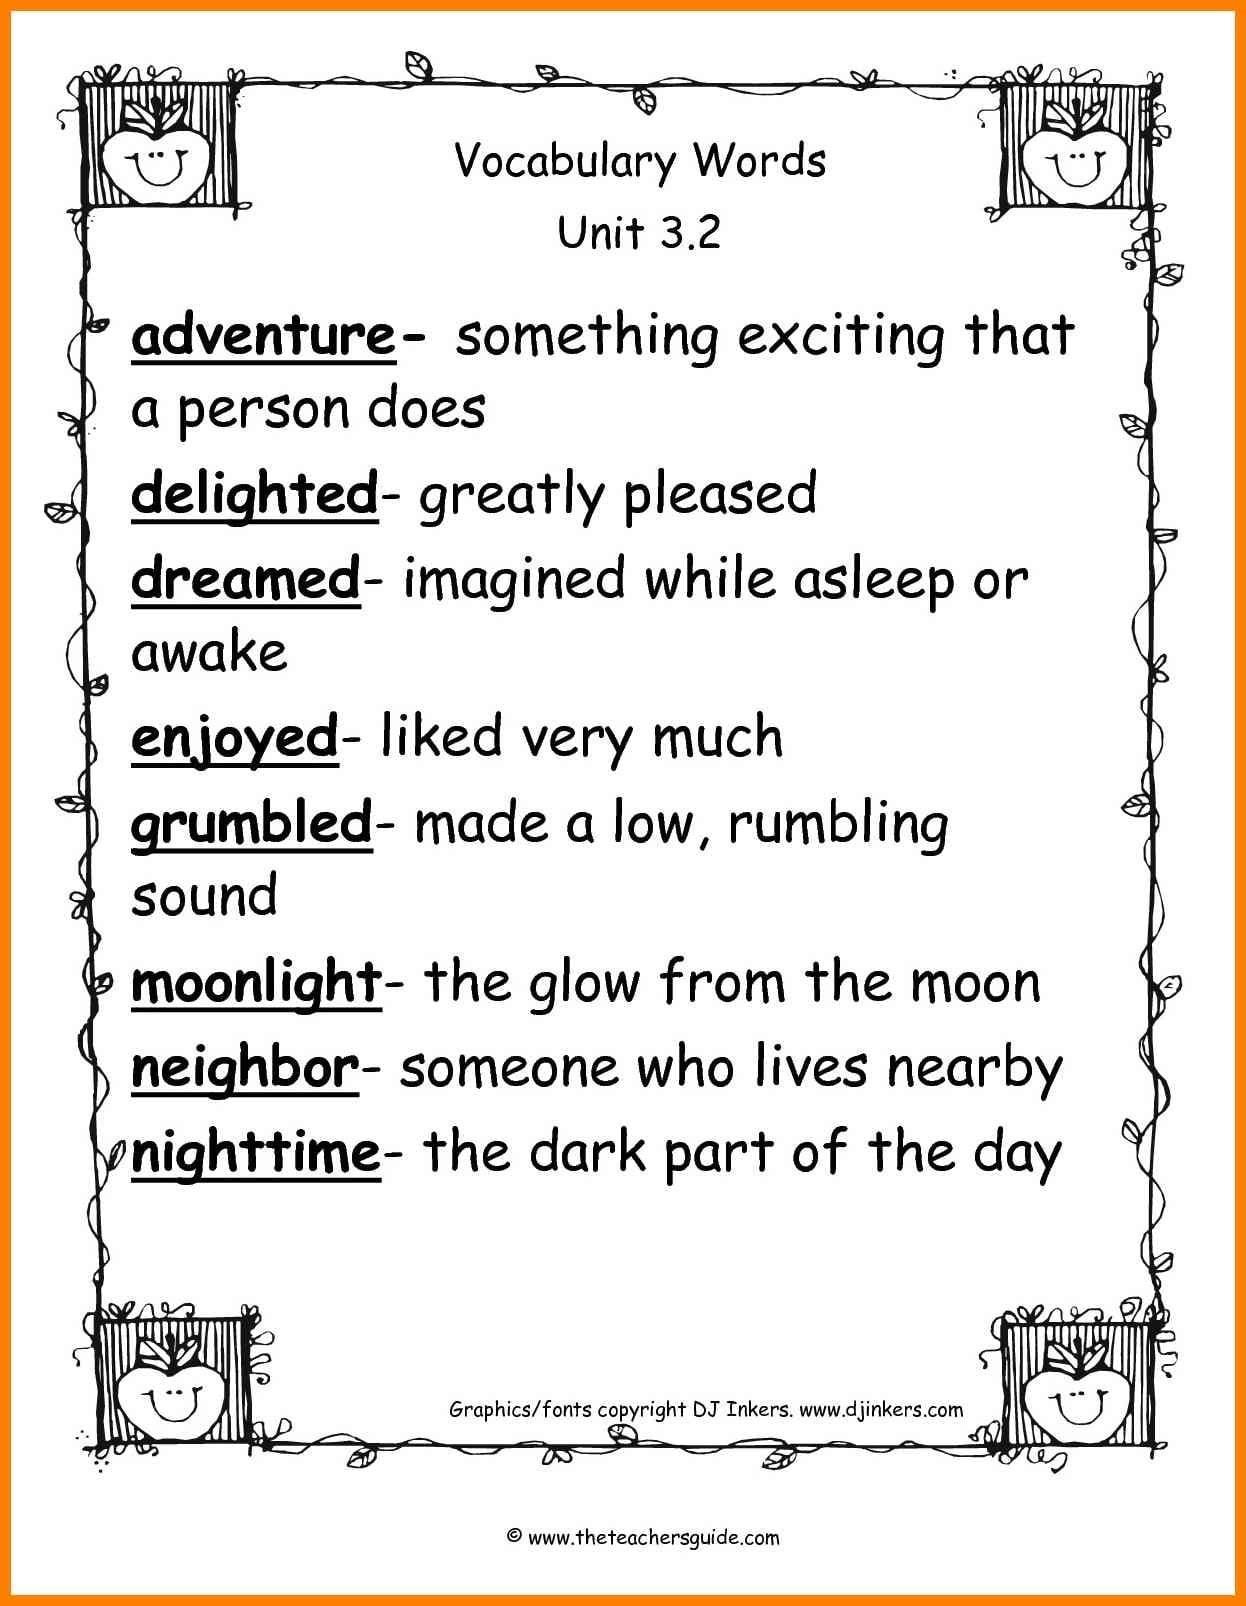 2nd-grade-vocabulary-worksheets-db-excel